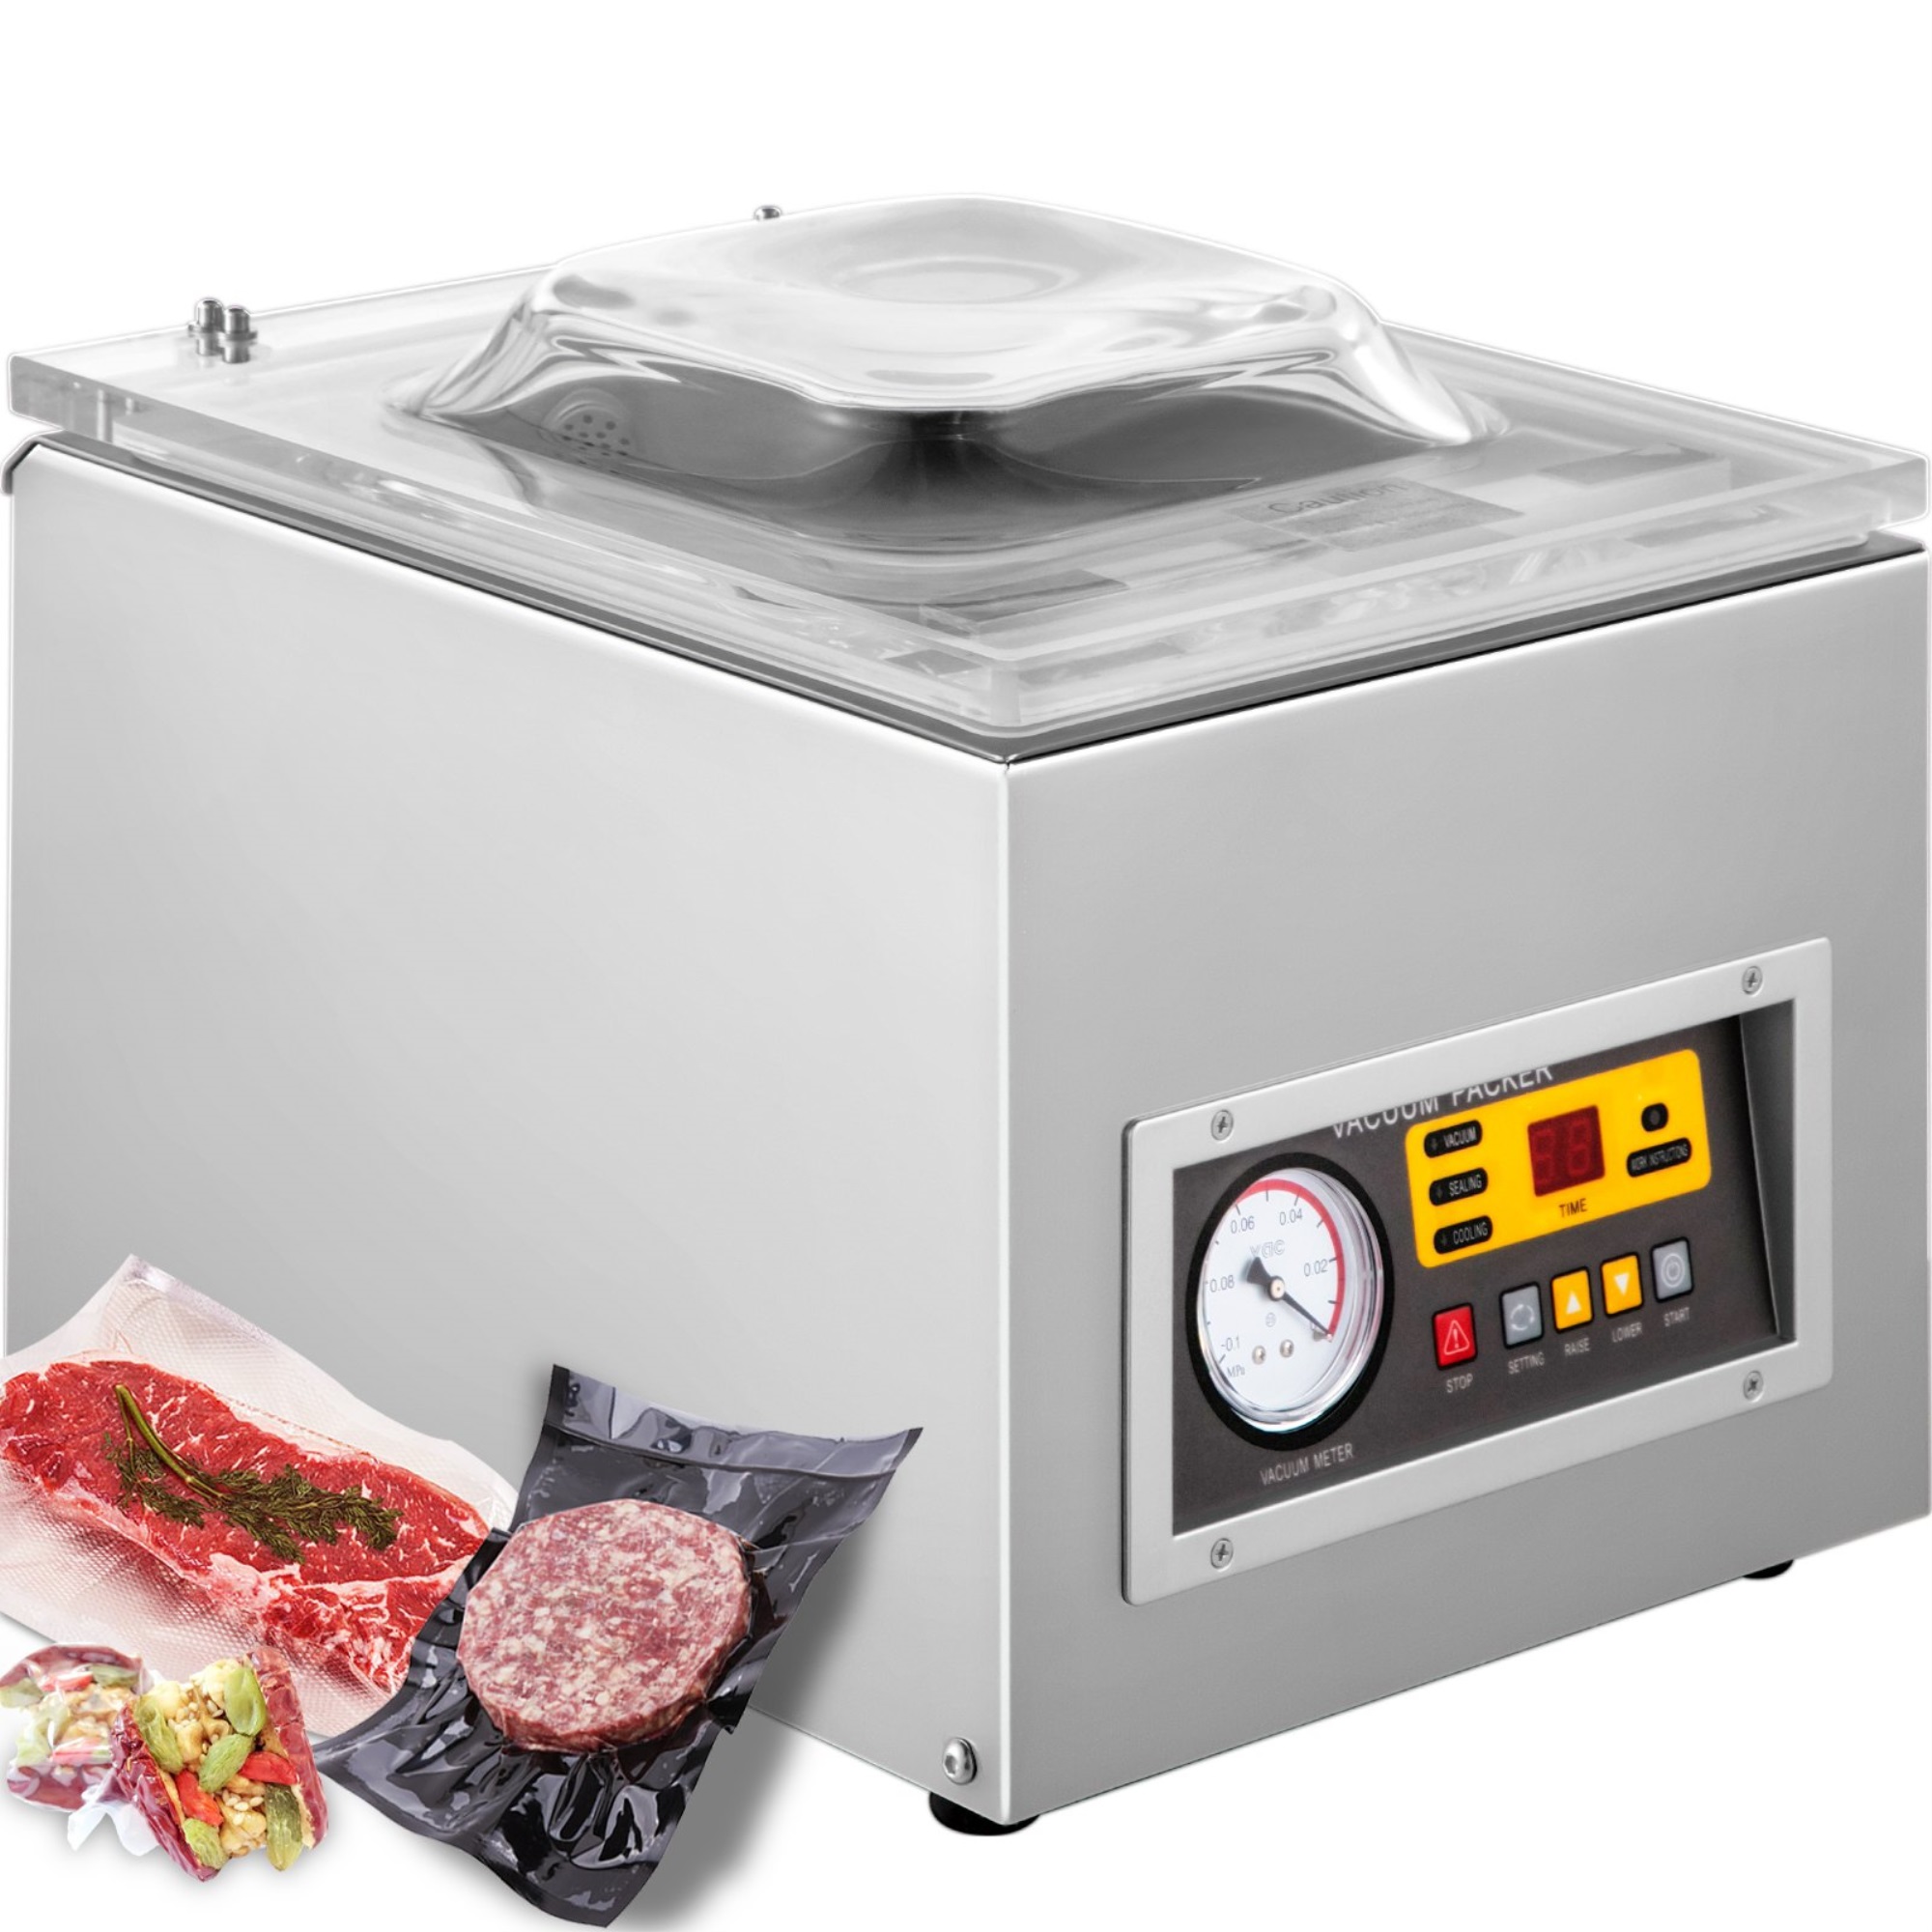 VEVOR 120w Vacuum Chamber Sealer Food Sealing Machine Commercial Packing Machine